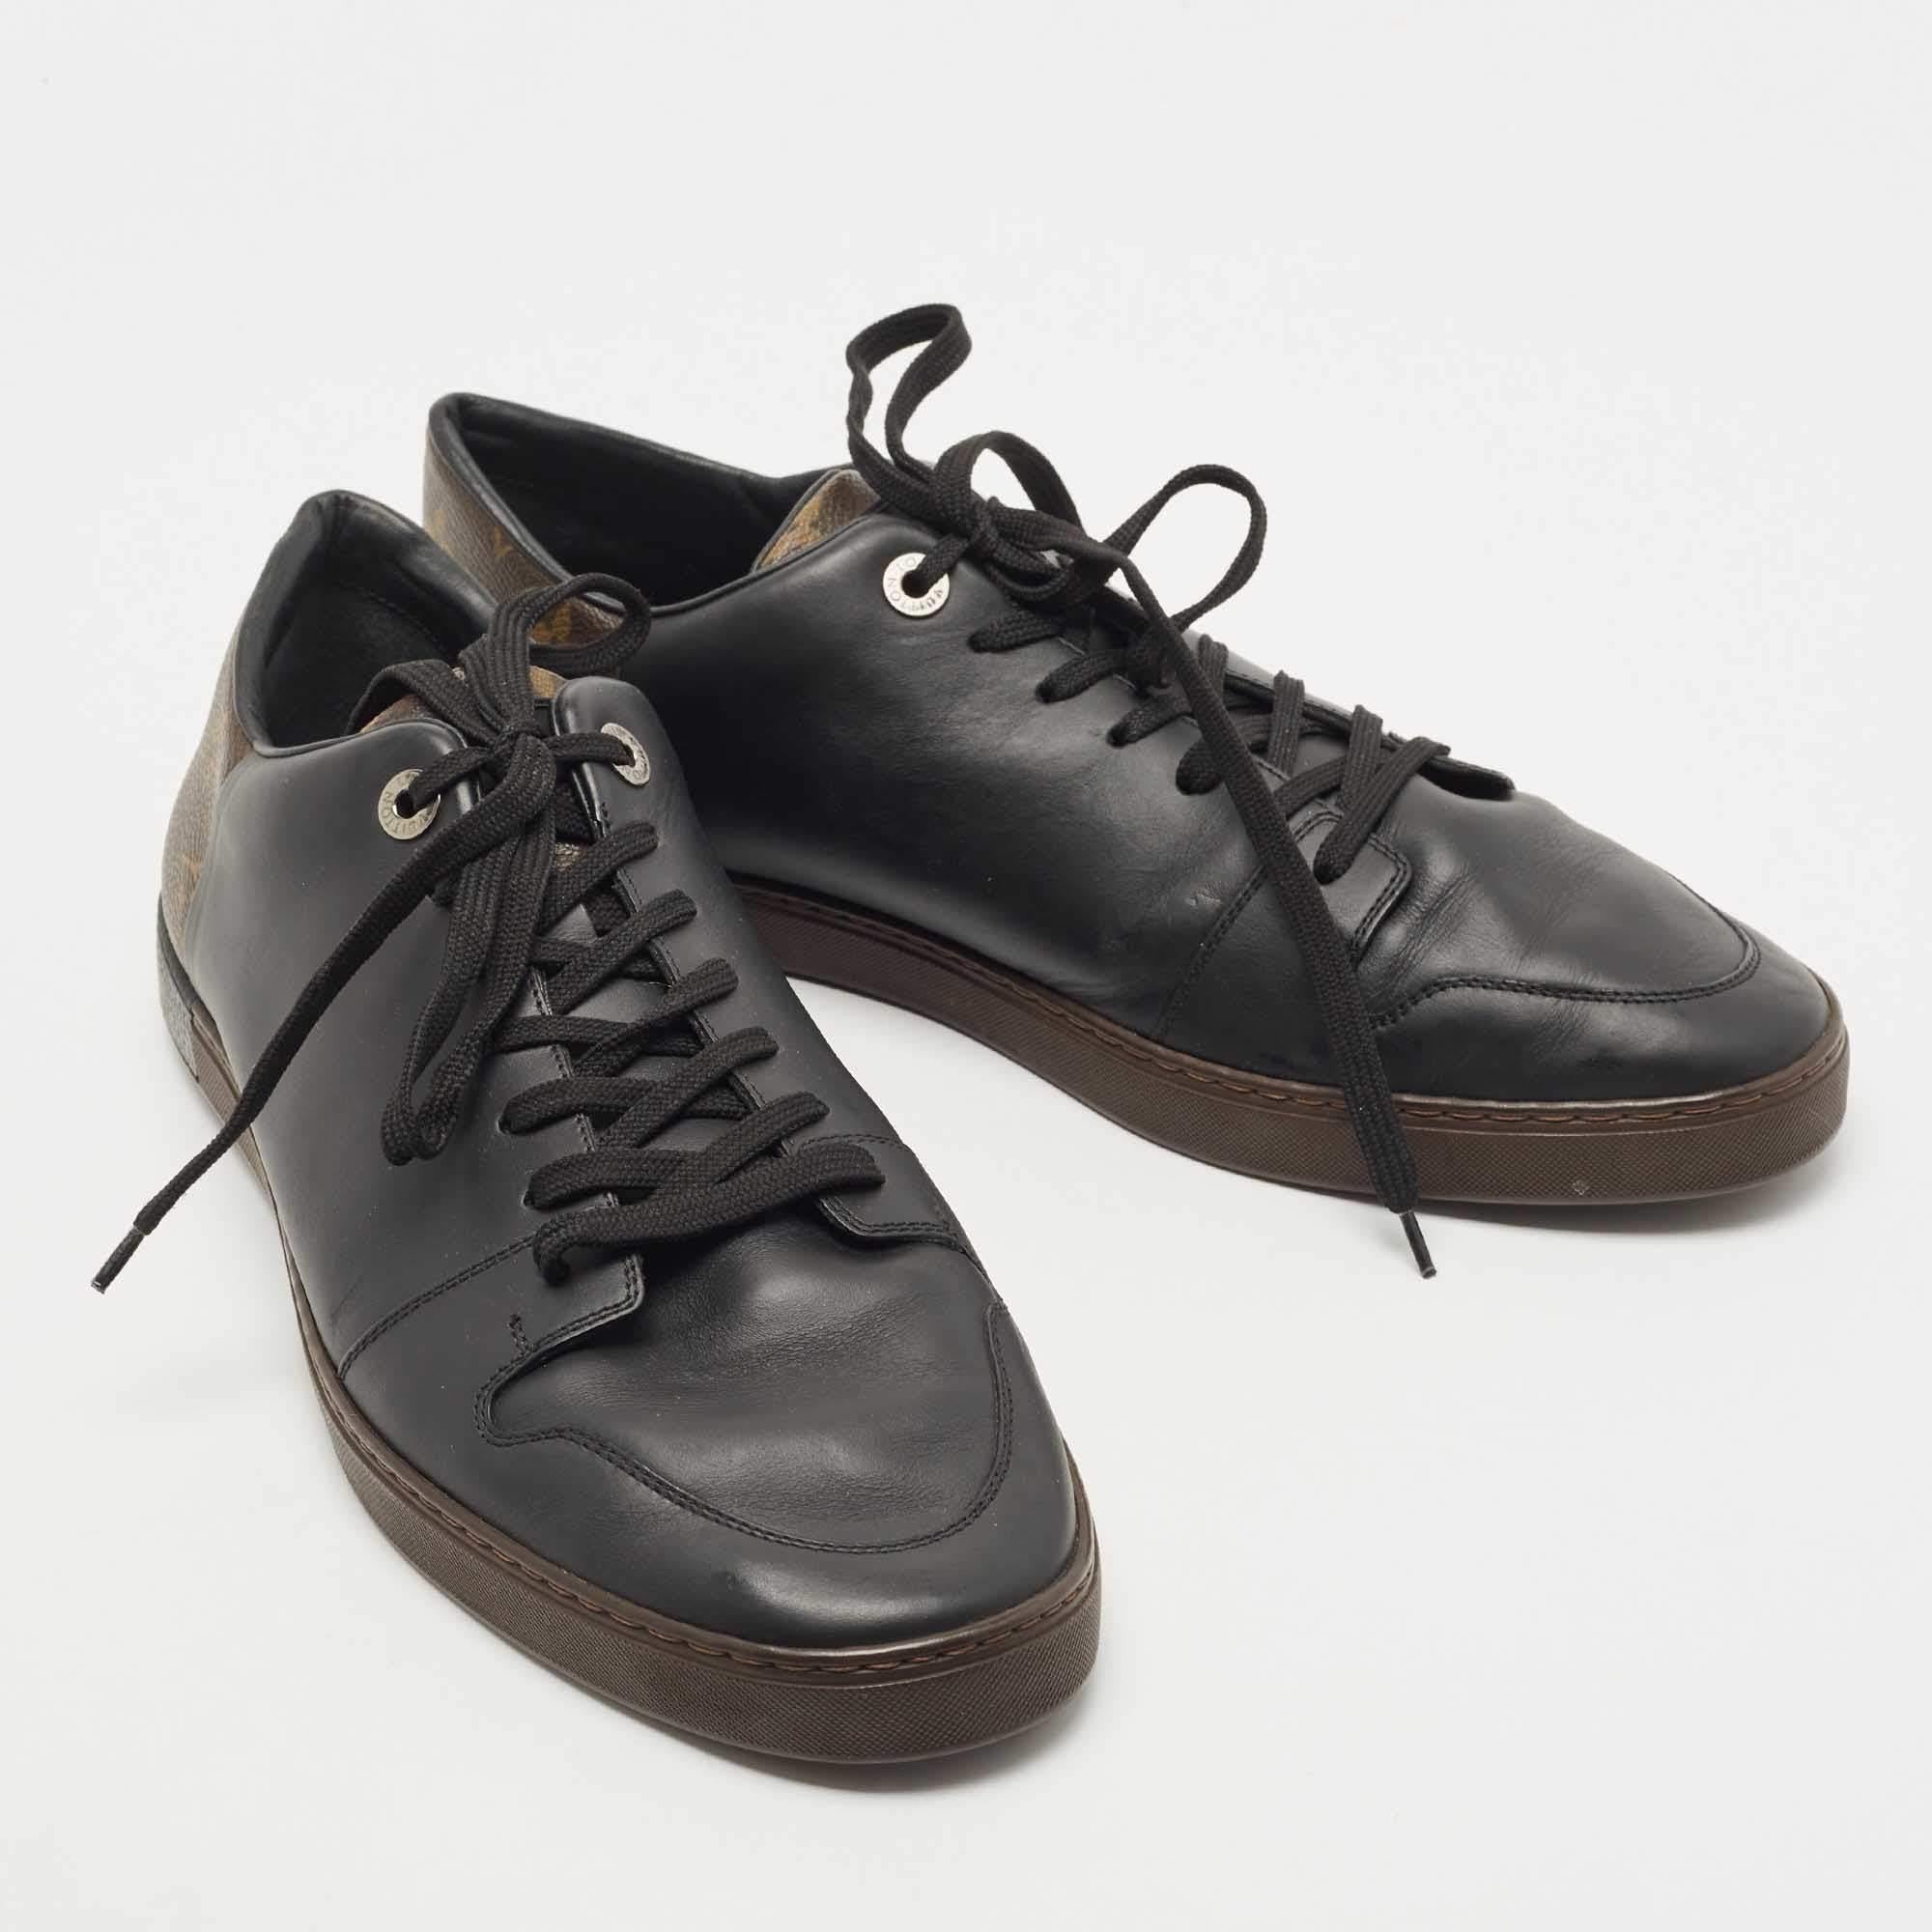 Louis Vuitton Black Leather and Monogram Canvas Line Up Sneakers Size 43 1